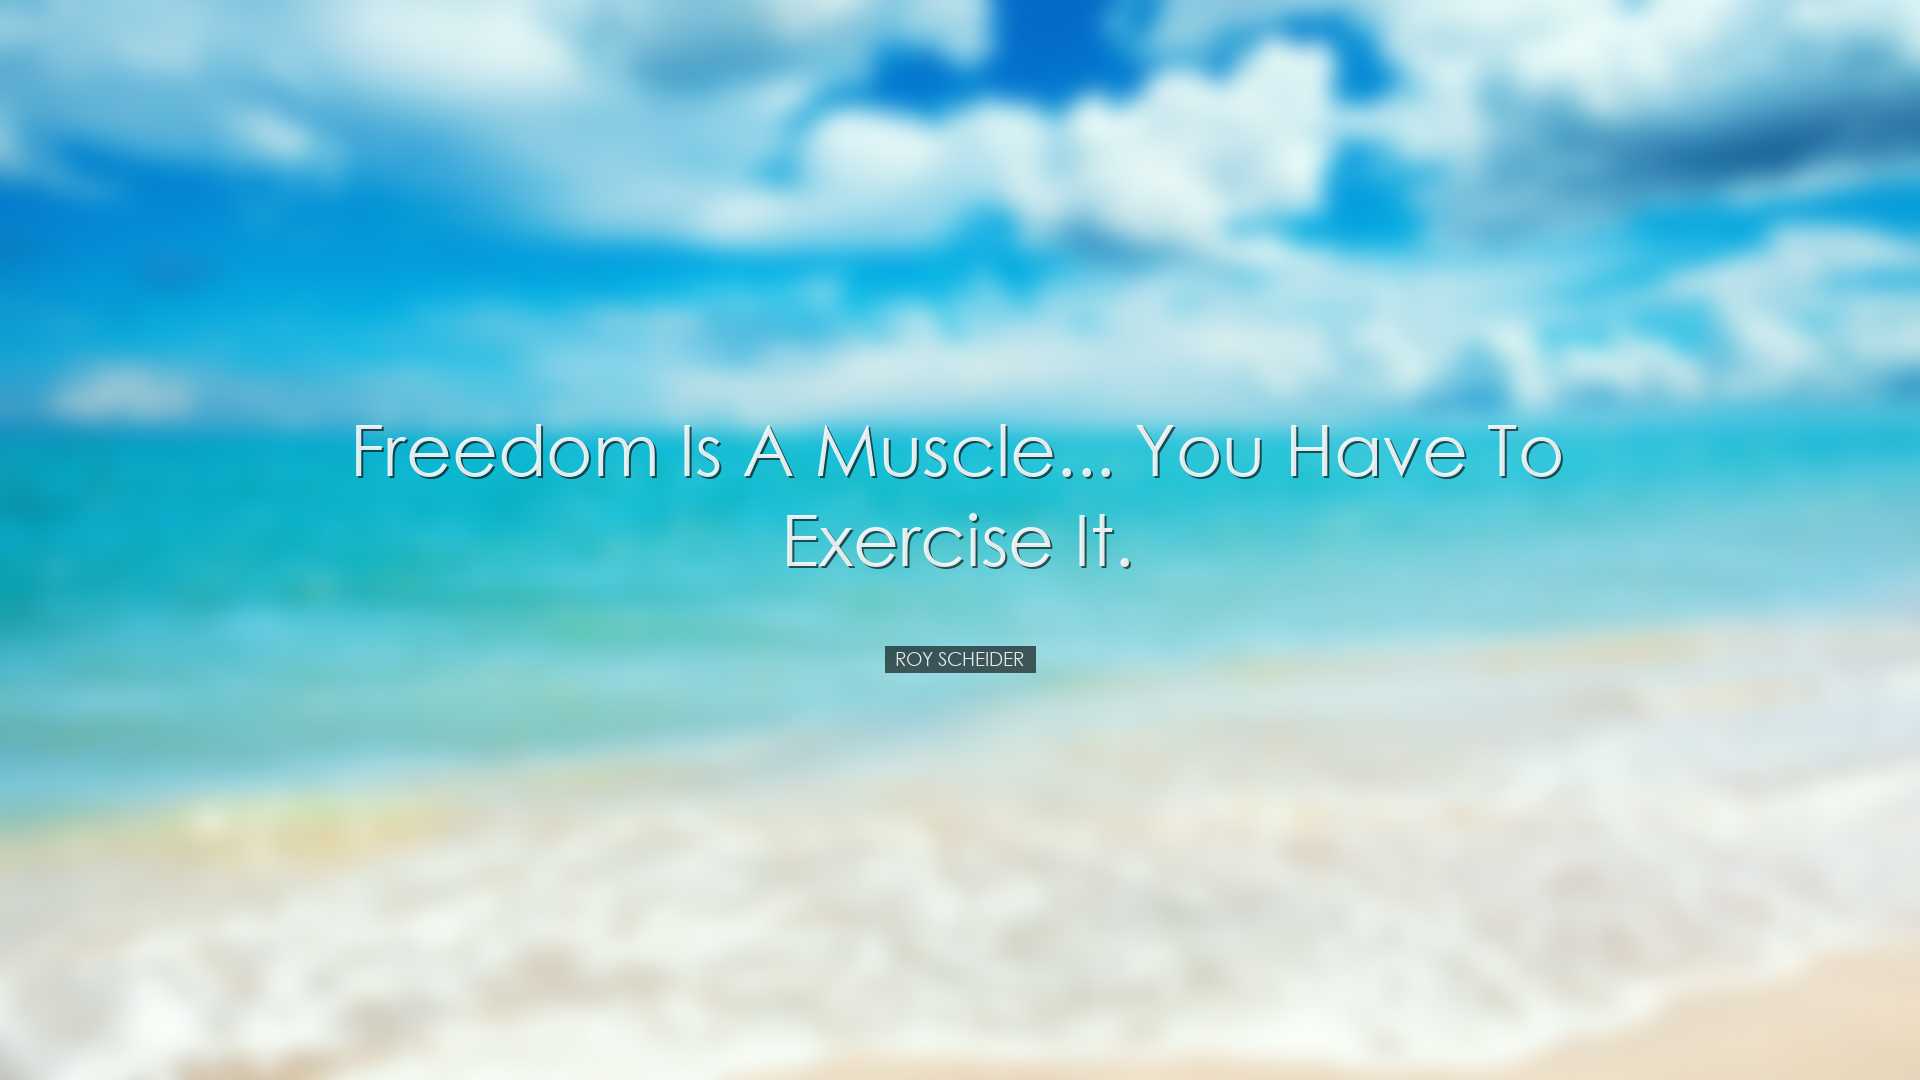 Freedom is a muscle... you have to exercise it. - Roy Scheider